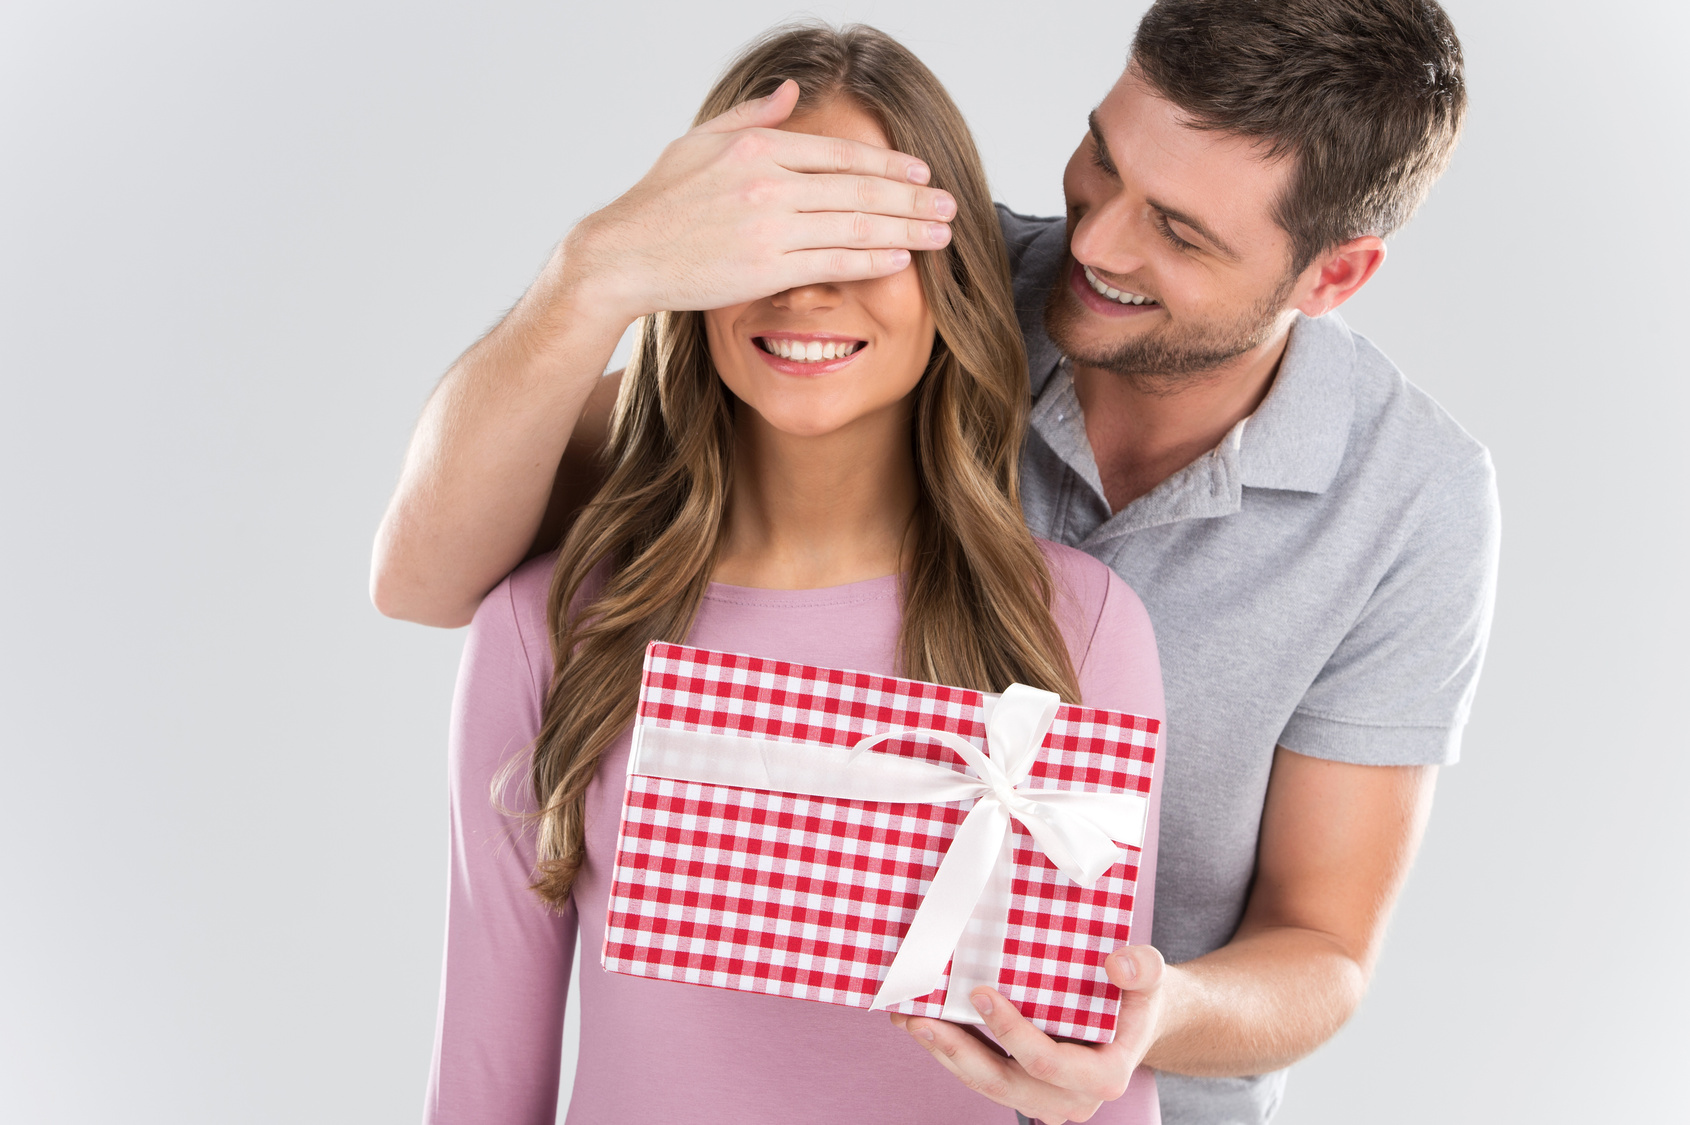 Man surprising his girlfriend with gift on grey background.